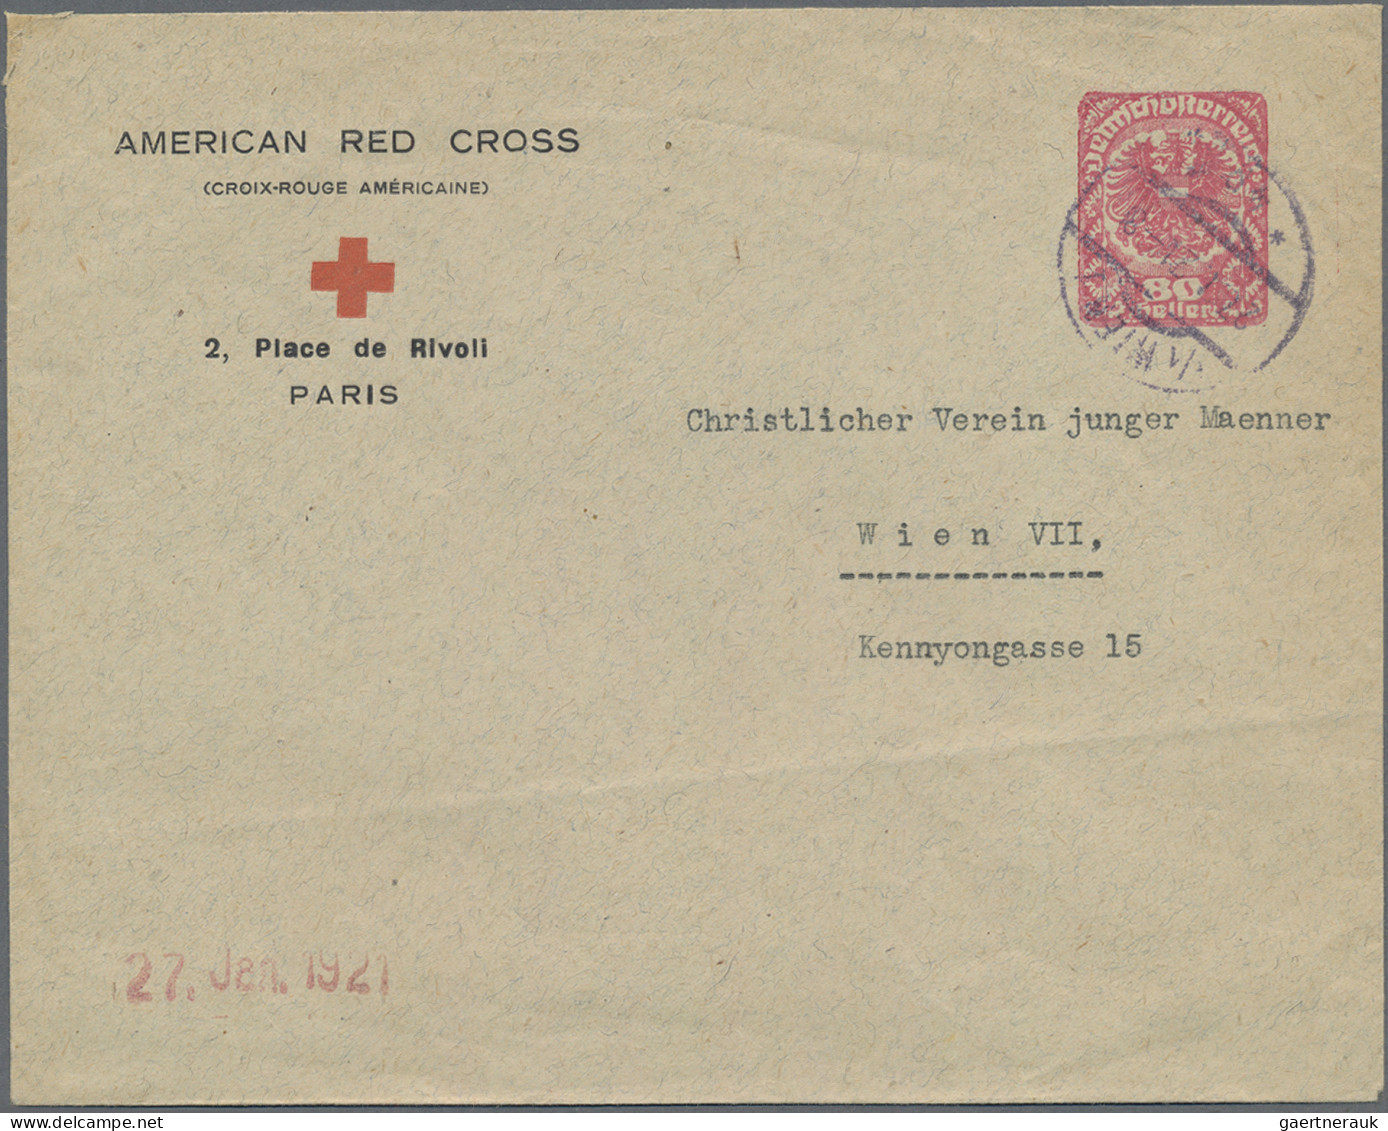 Thematics: Red Cross: 1921, "AMERICAN RED CROSS" (CROIX-ROUGE AMERICAINE) 2, Pla - Rotes Kreuz